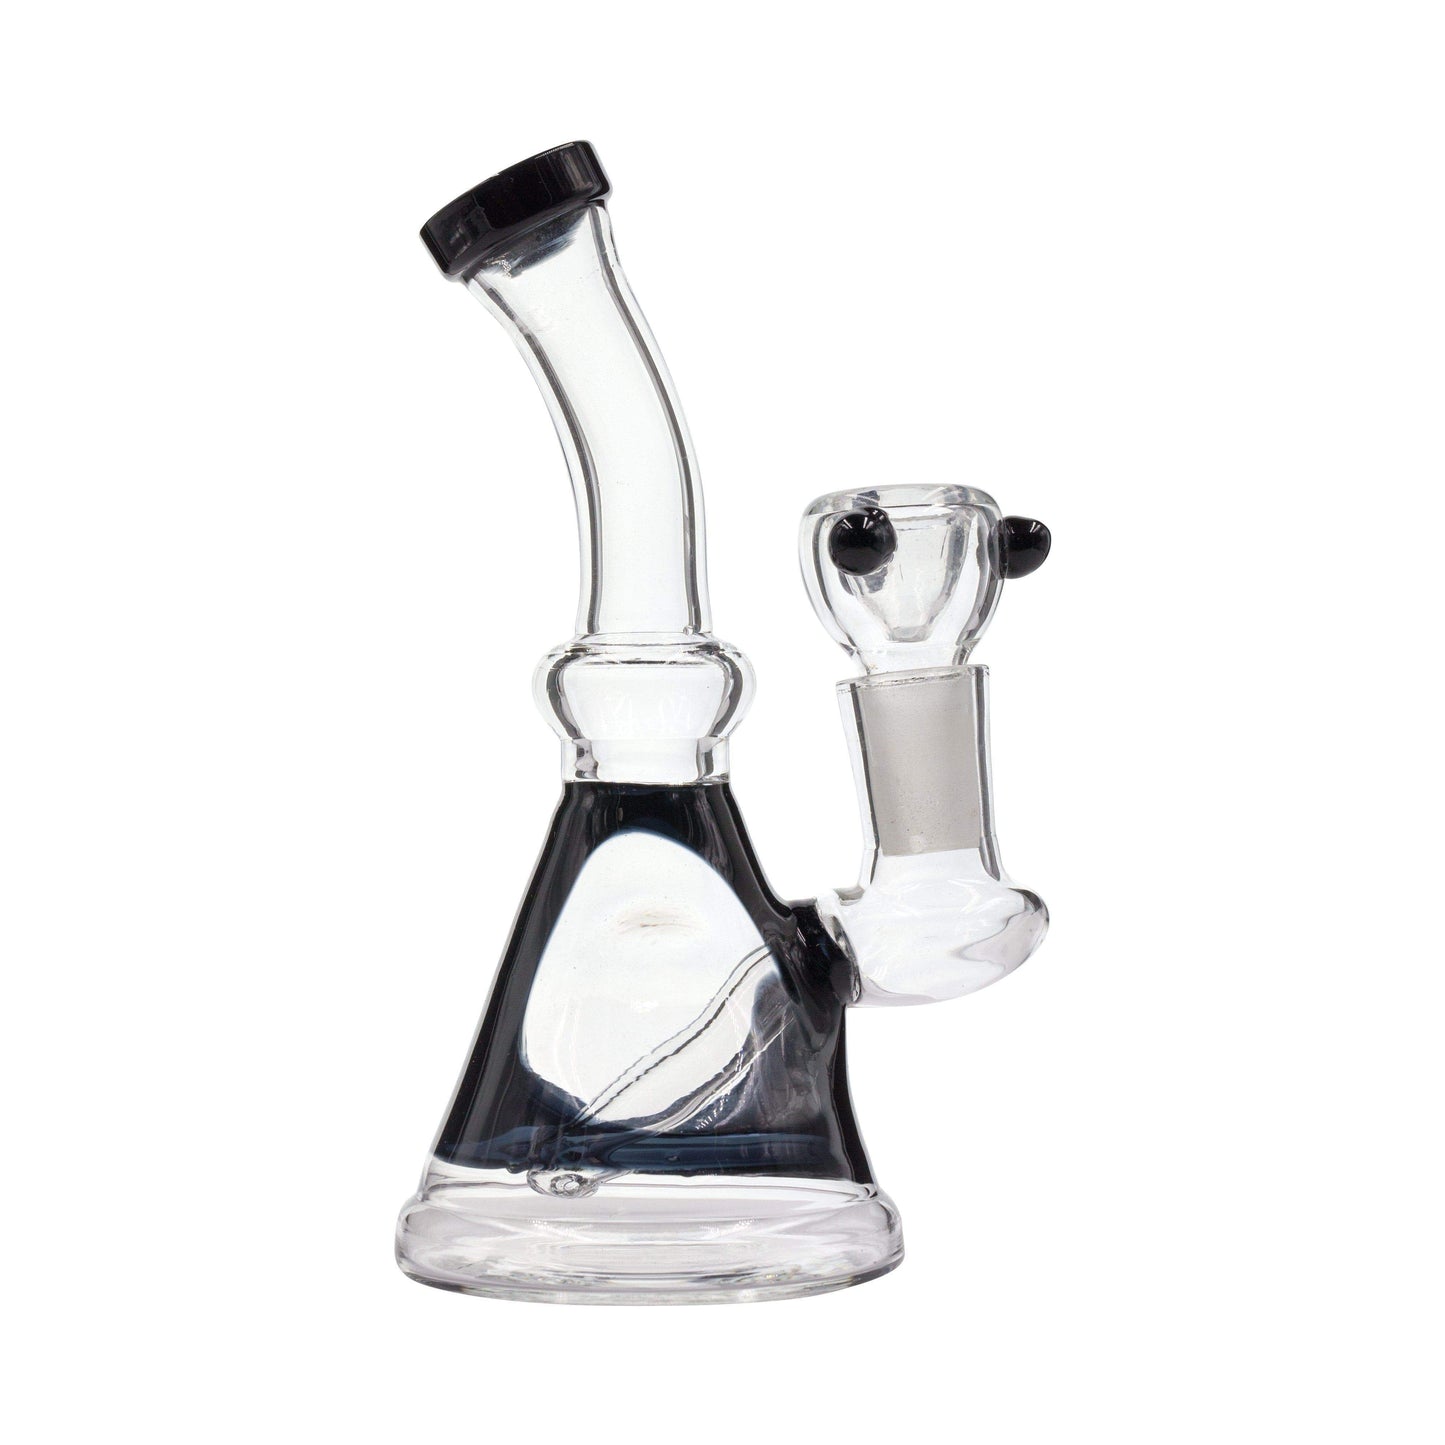 Exclusive Transparent and black glass bong with bowl